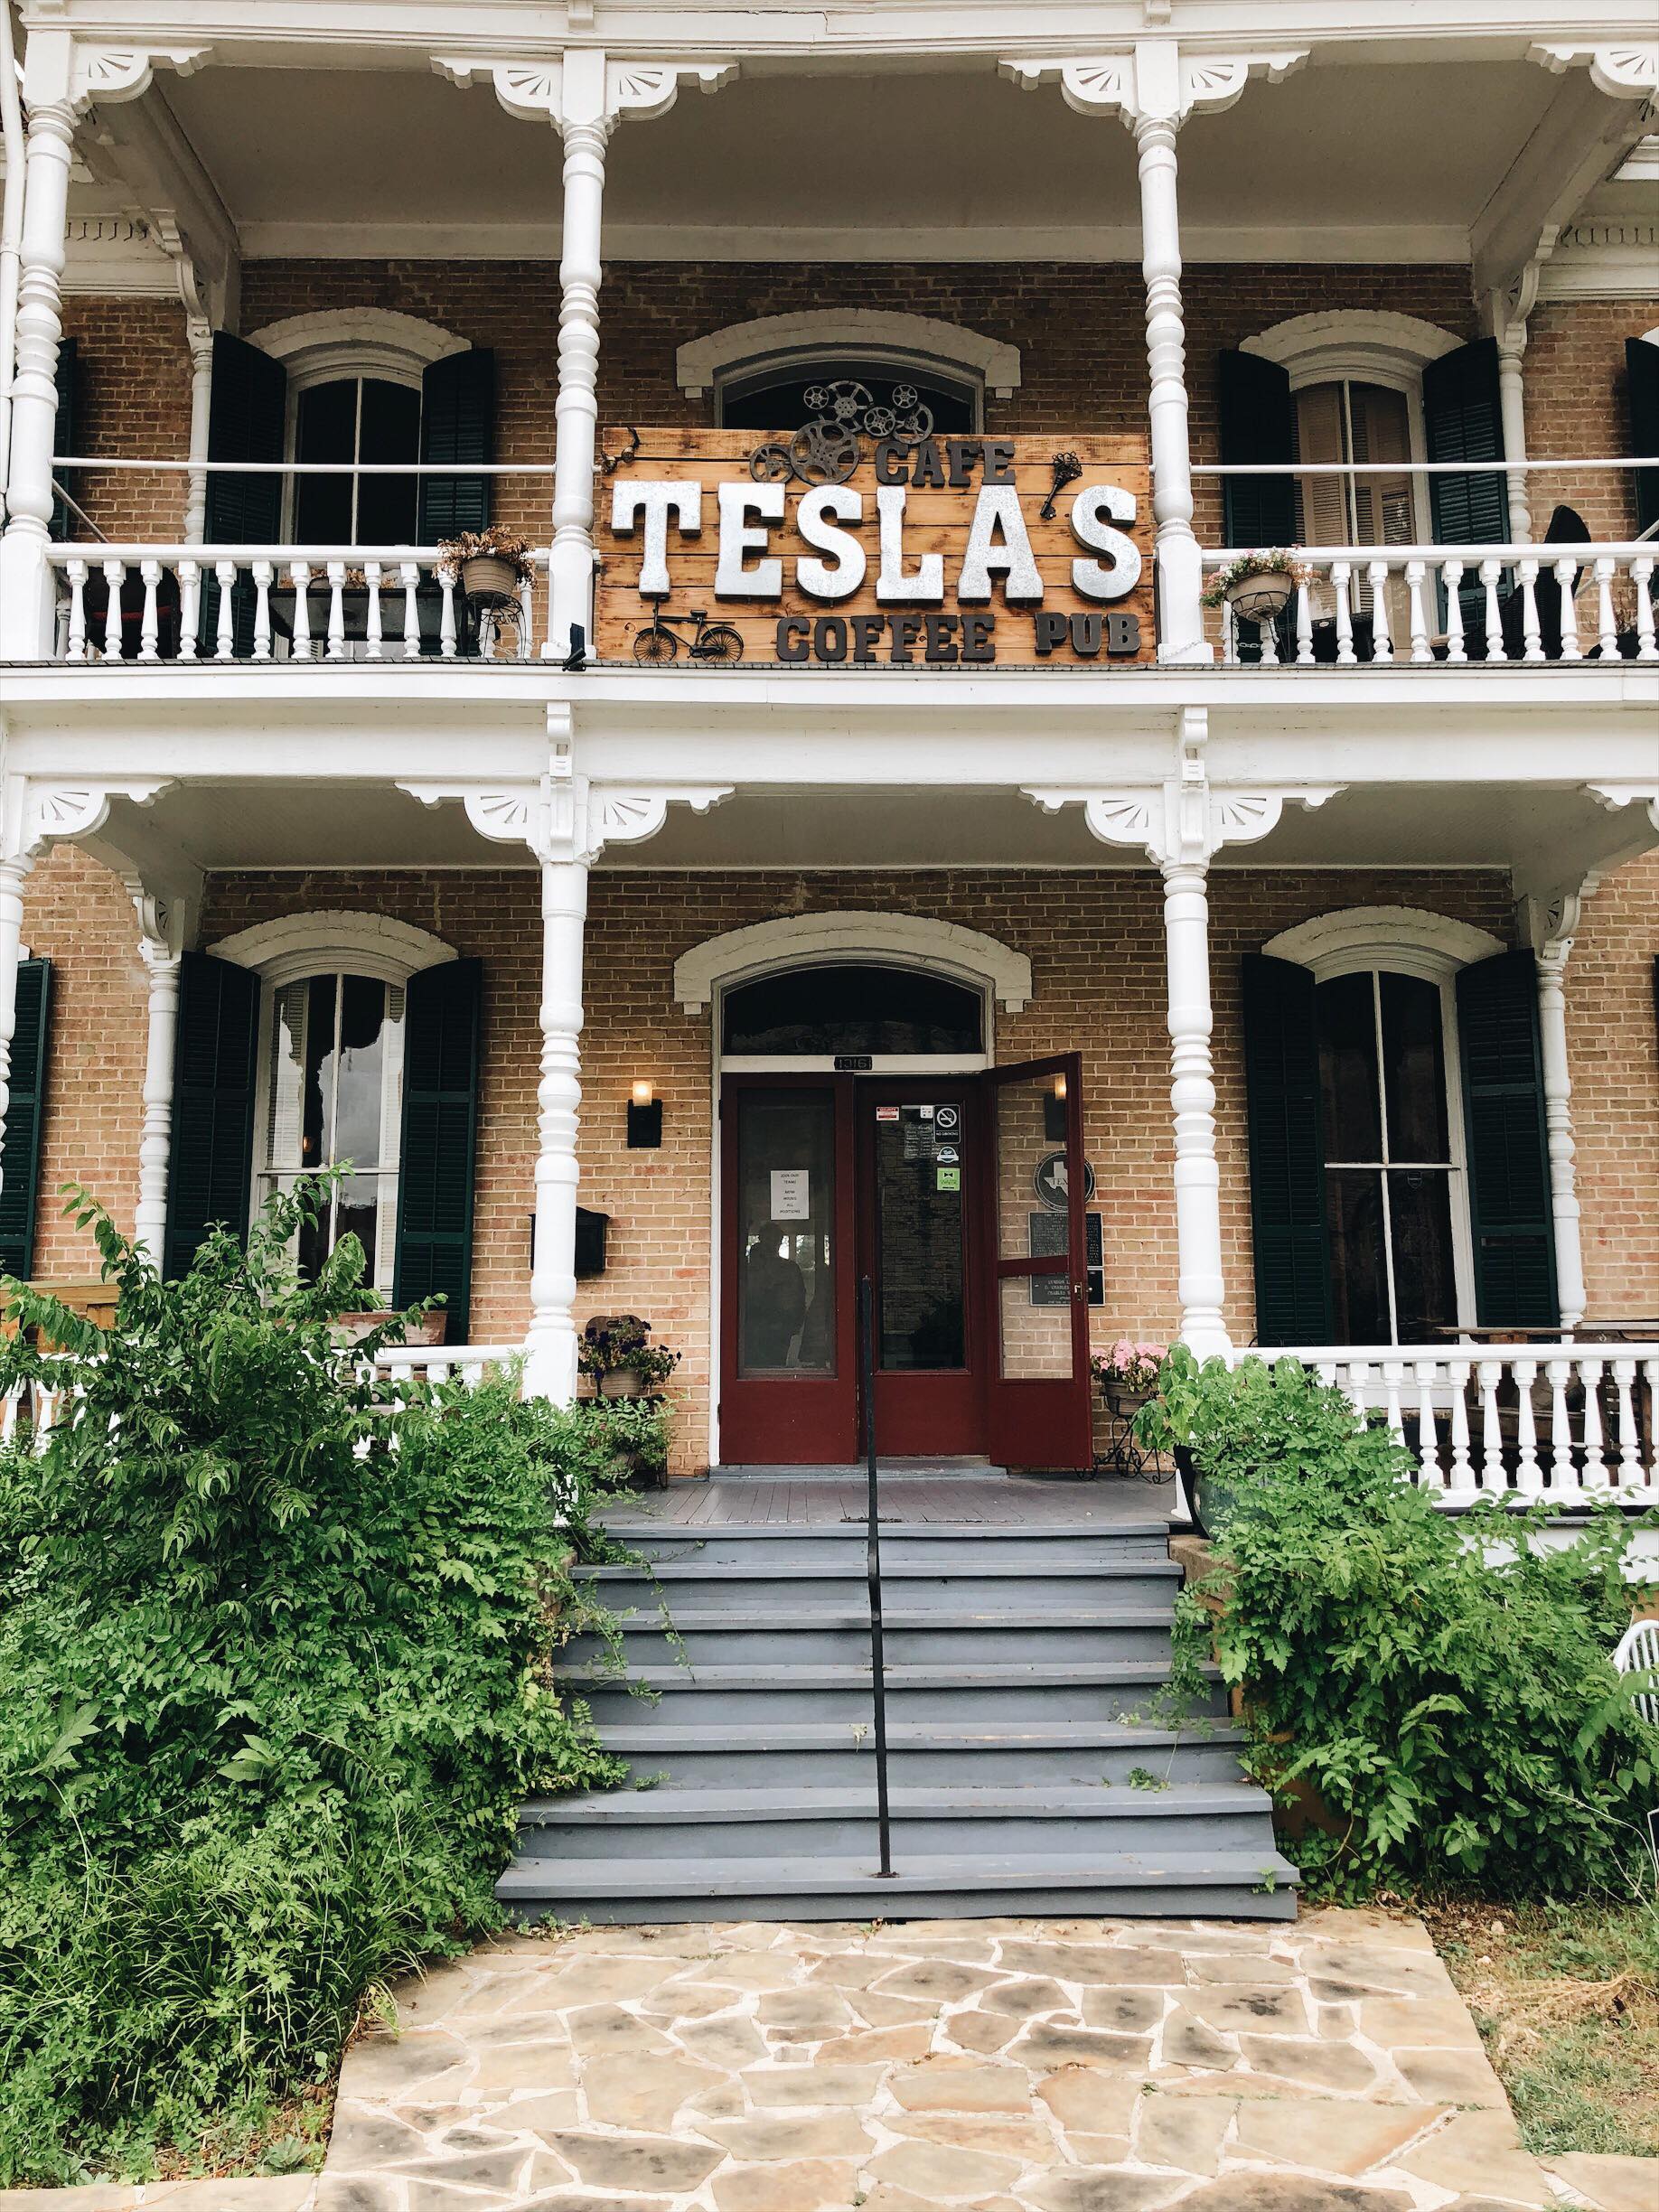 Brunch at Tesla's Cafe and Coffee Pub in Waco